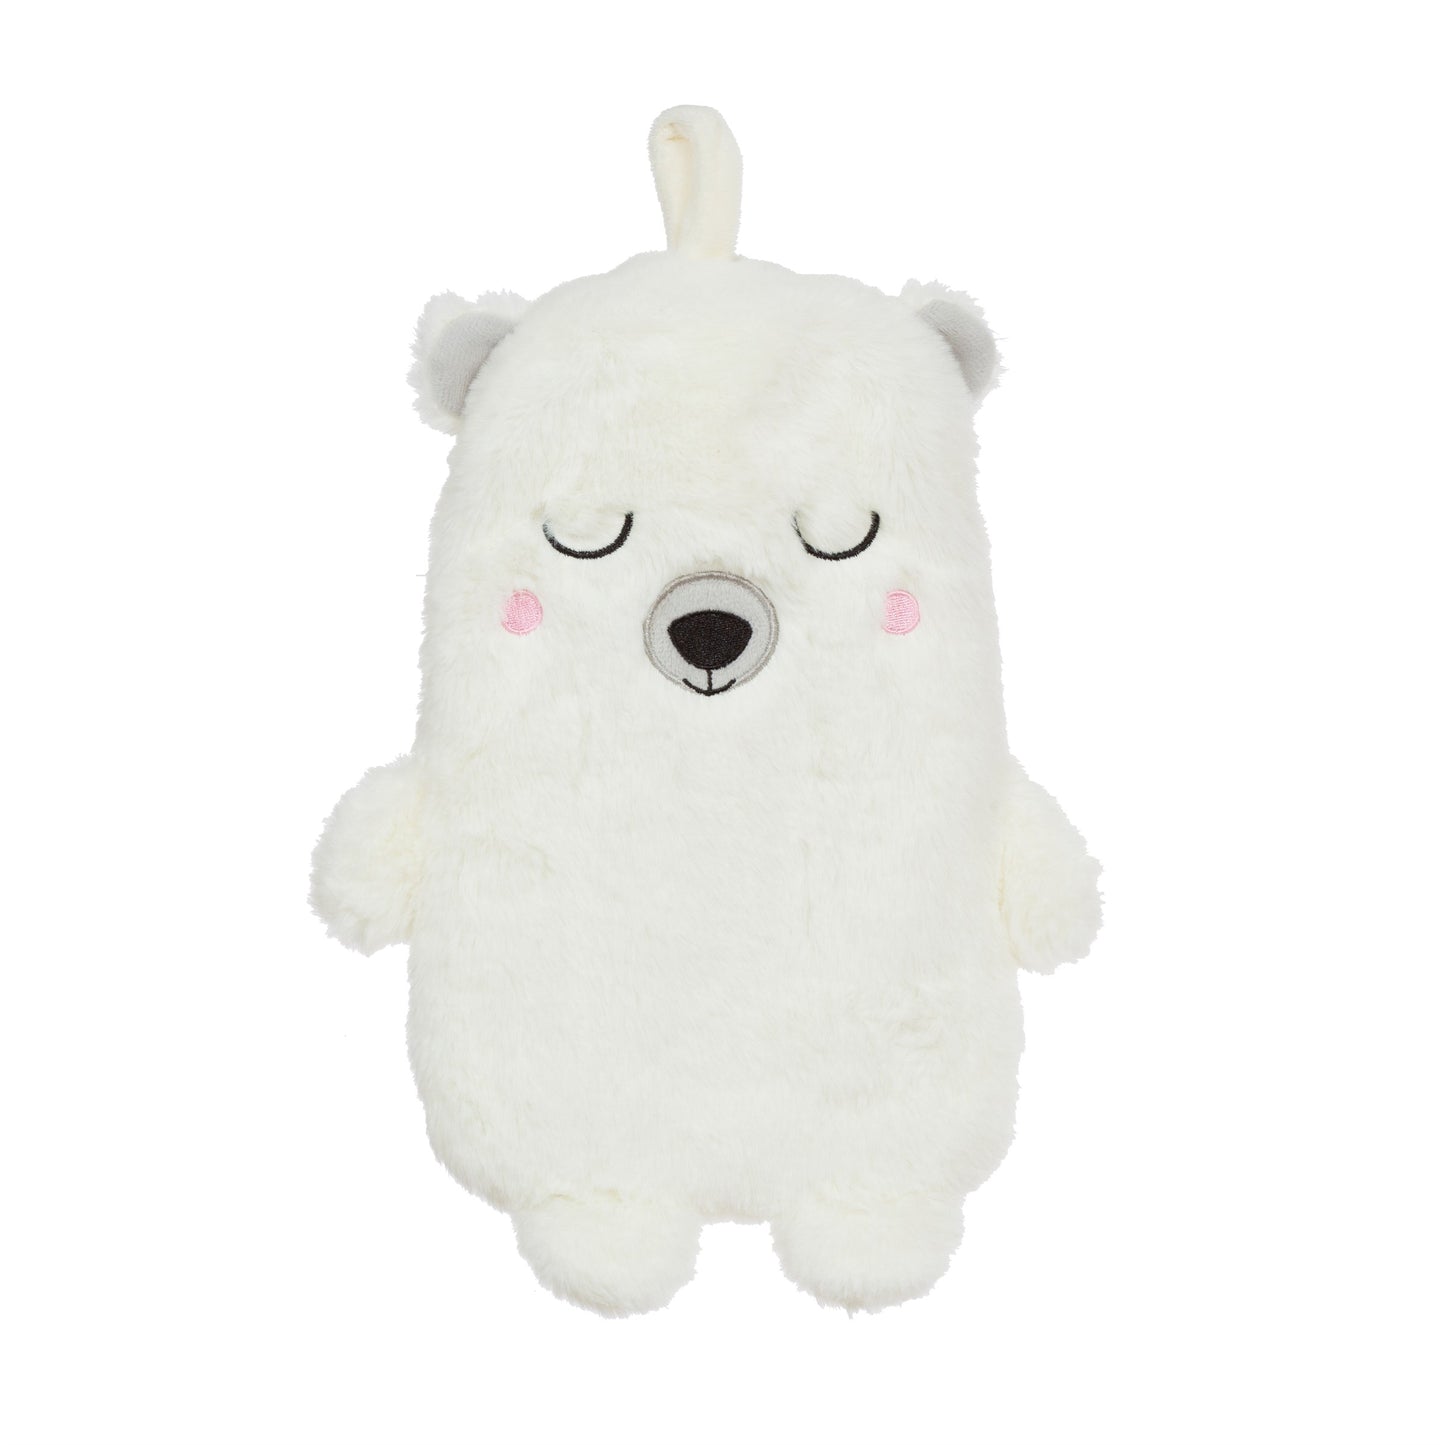 Polar bear hot water bottle with white background